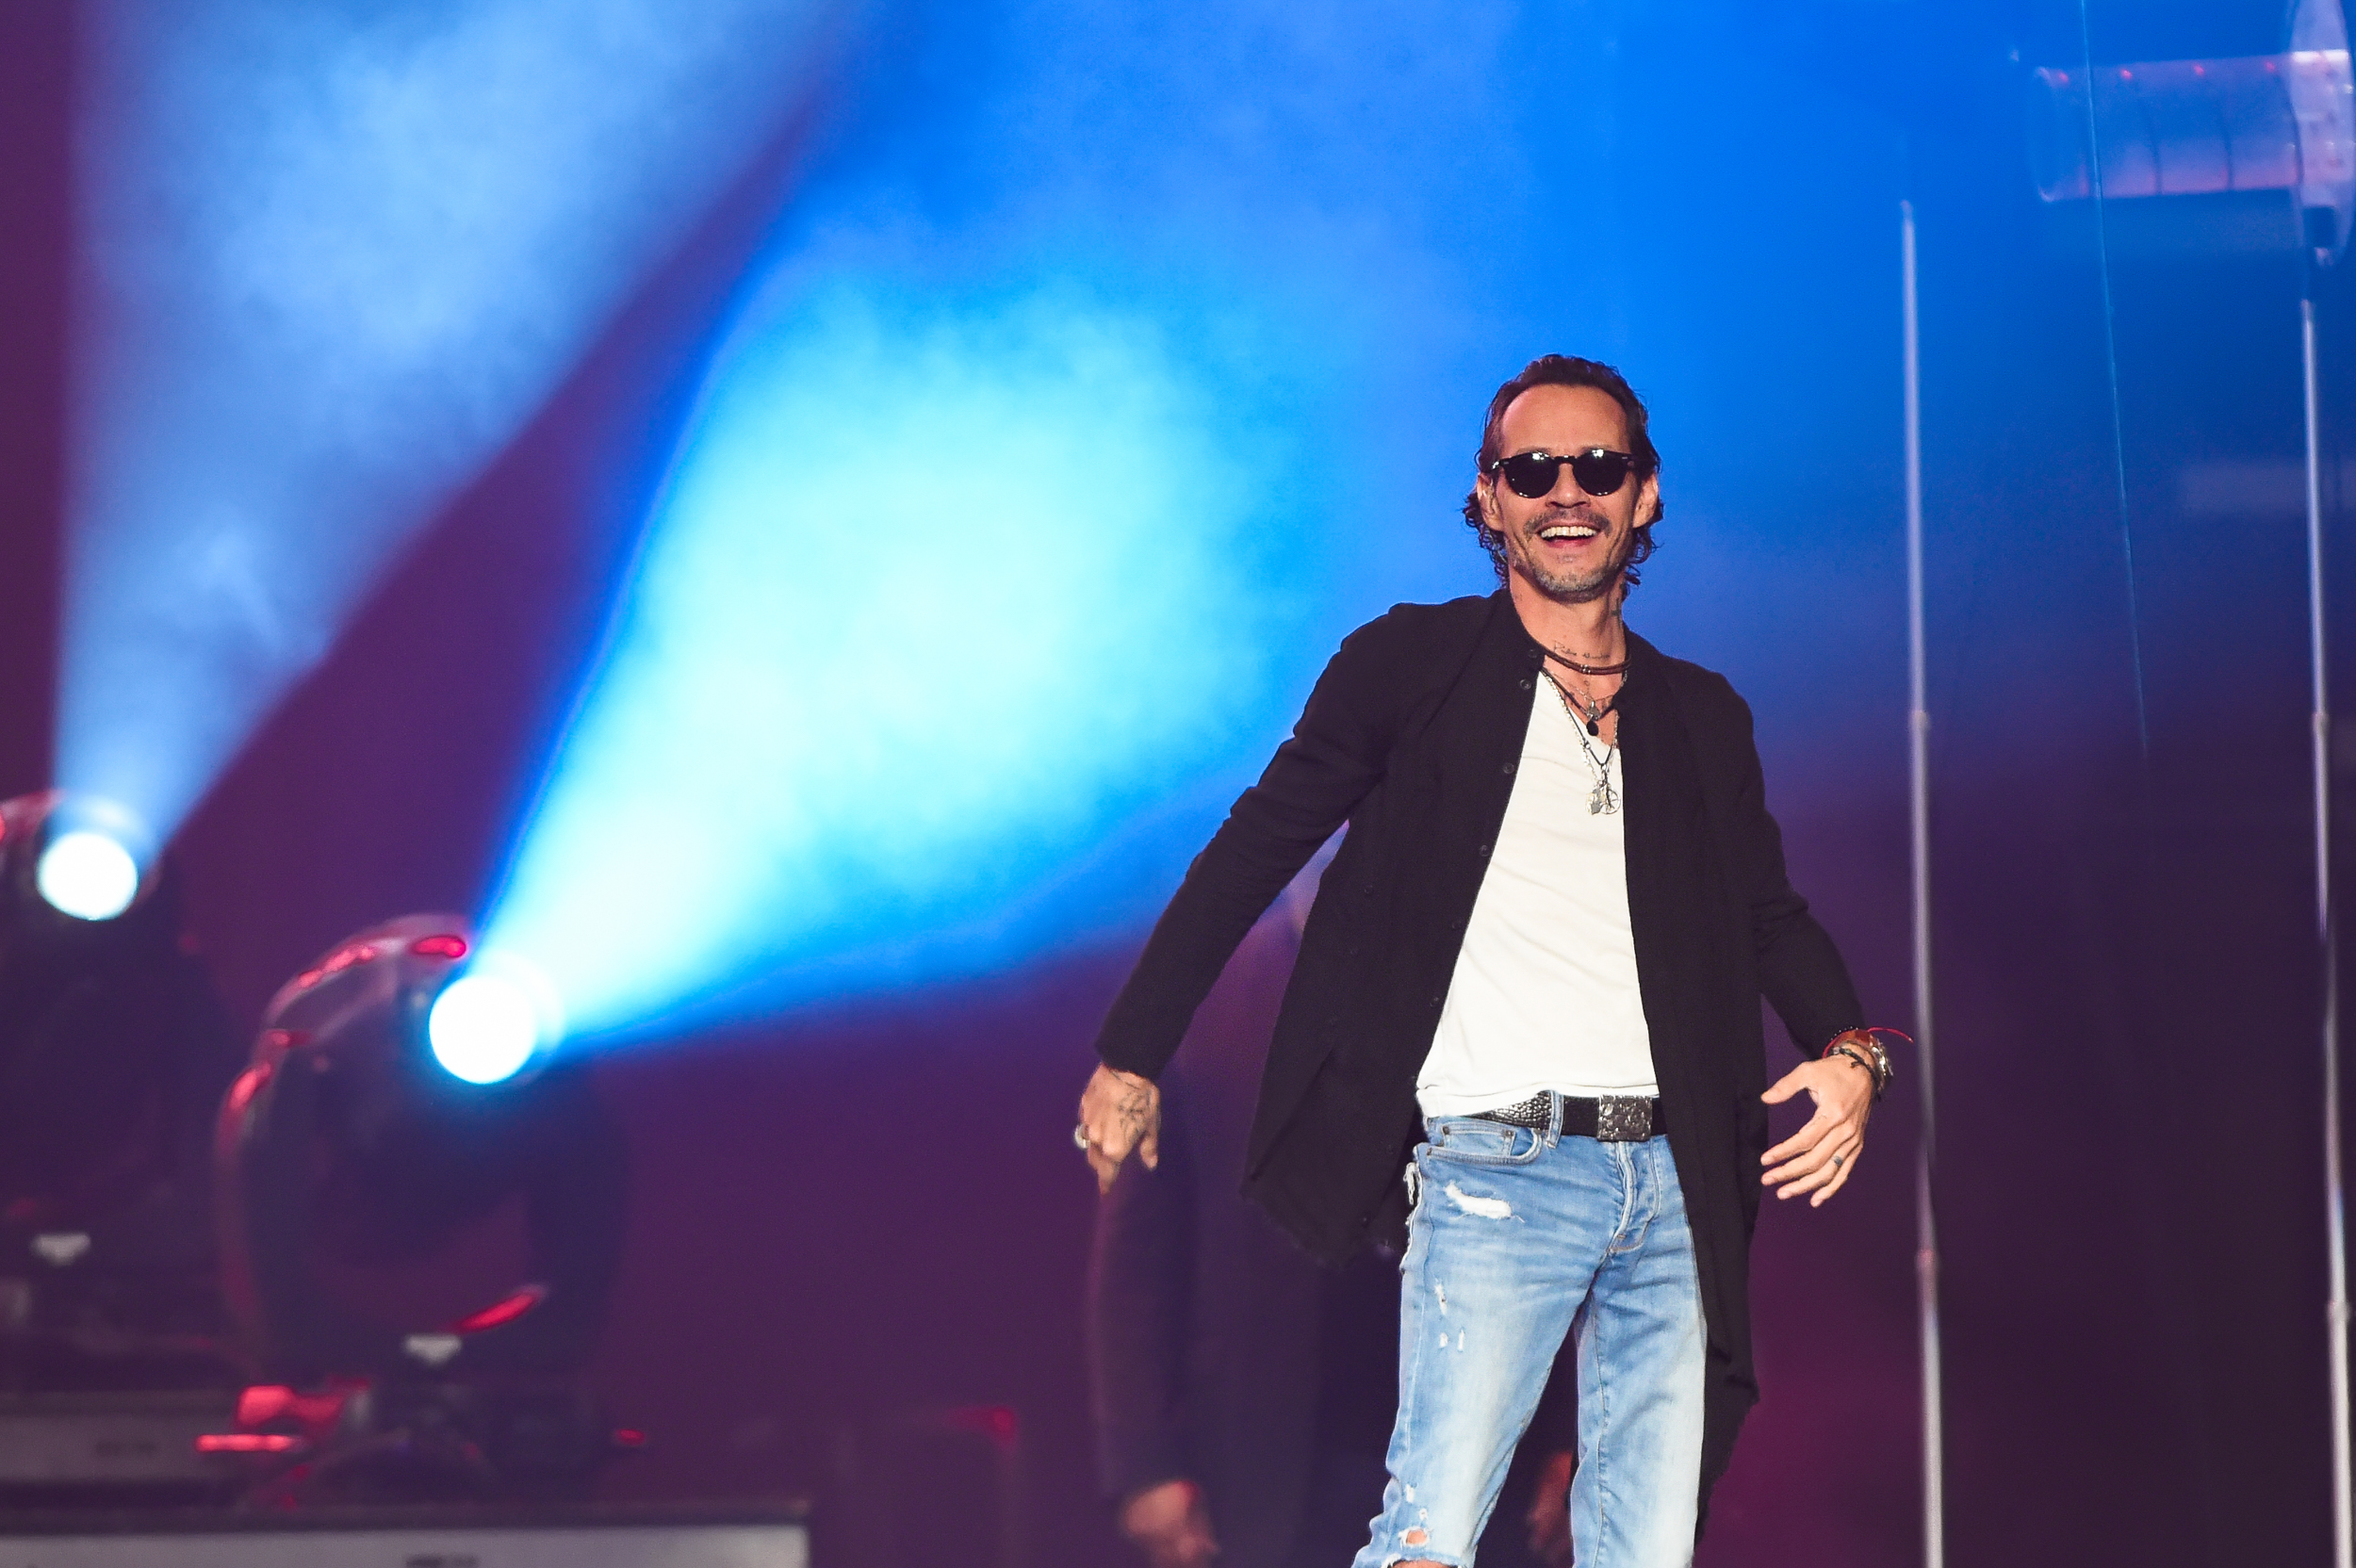 Marc Anthony in concert on the 2020 OPUS tour at the H.E.B. Center on March 1, 2020 in Cedar Park, Texas. Photo © Manuel Nauta